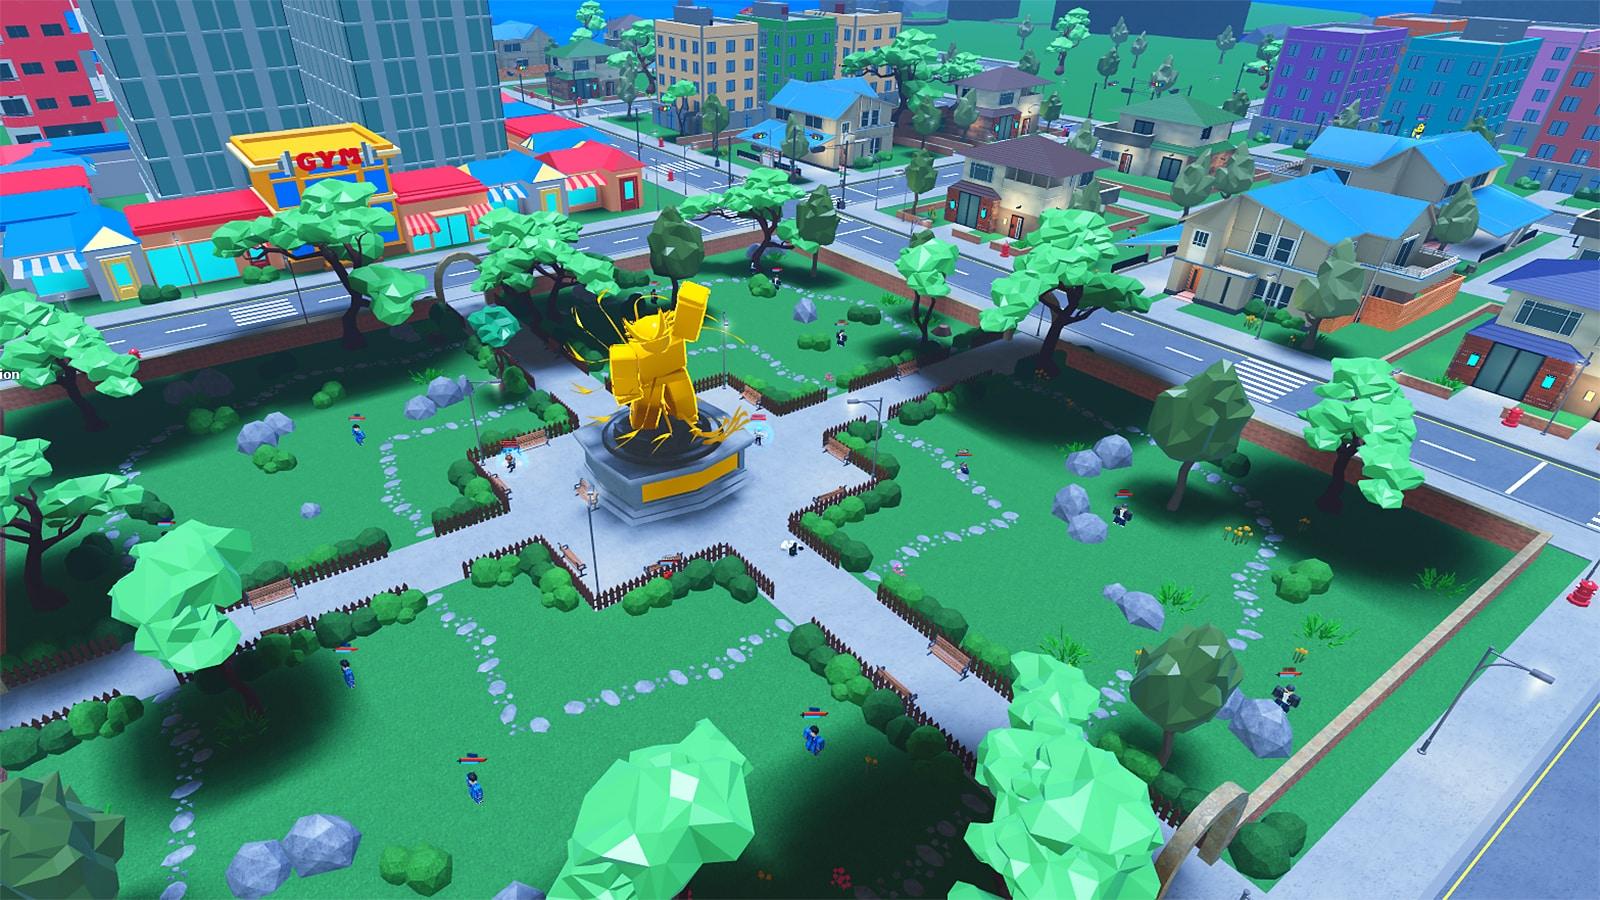 An image of gameplay in Boku No Roblox emastered